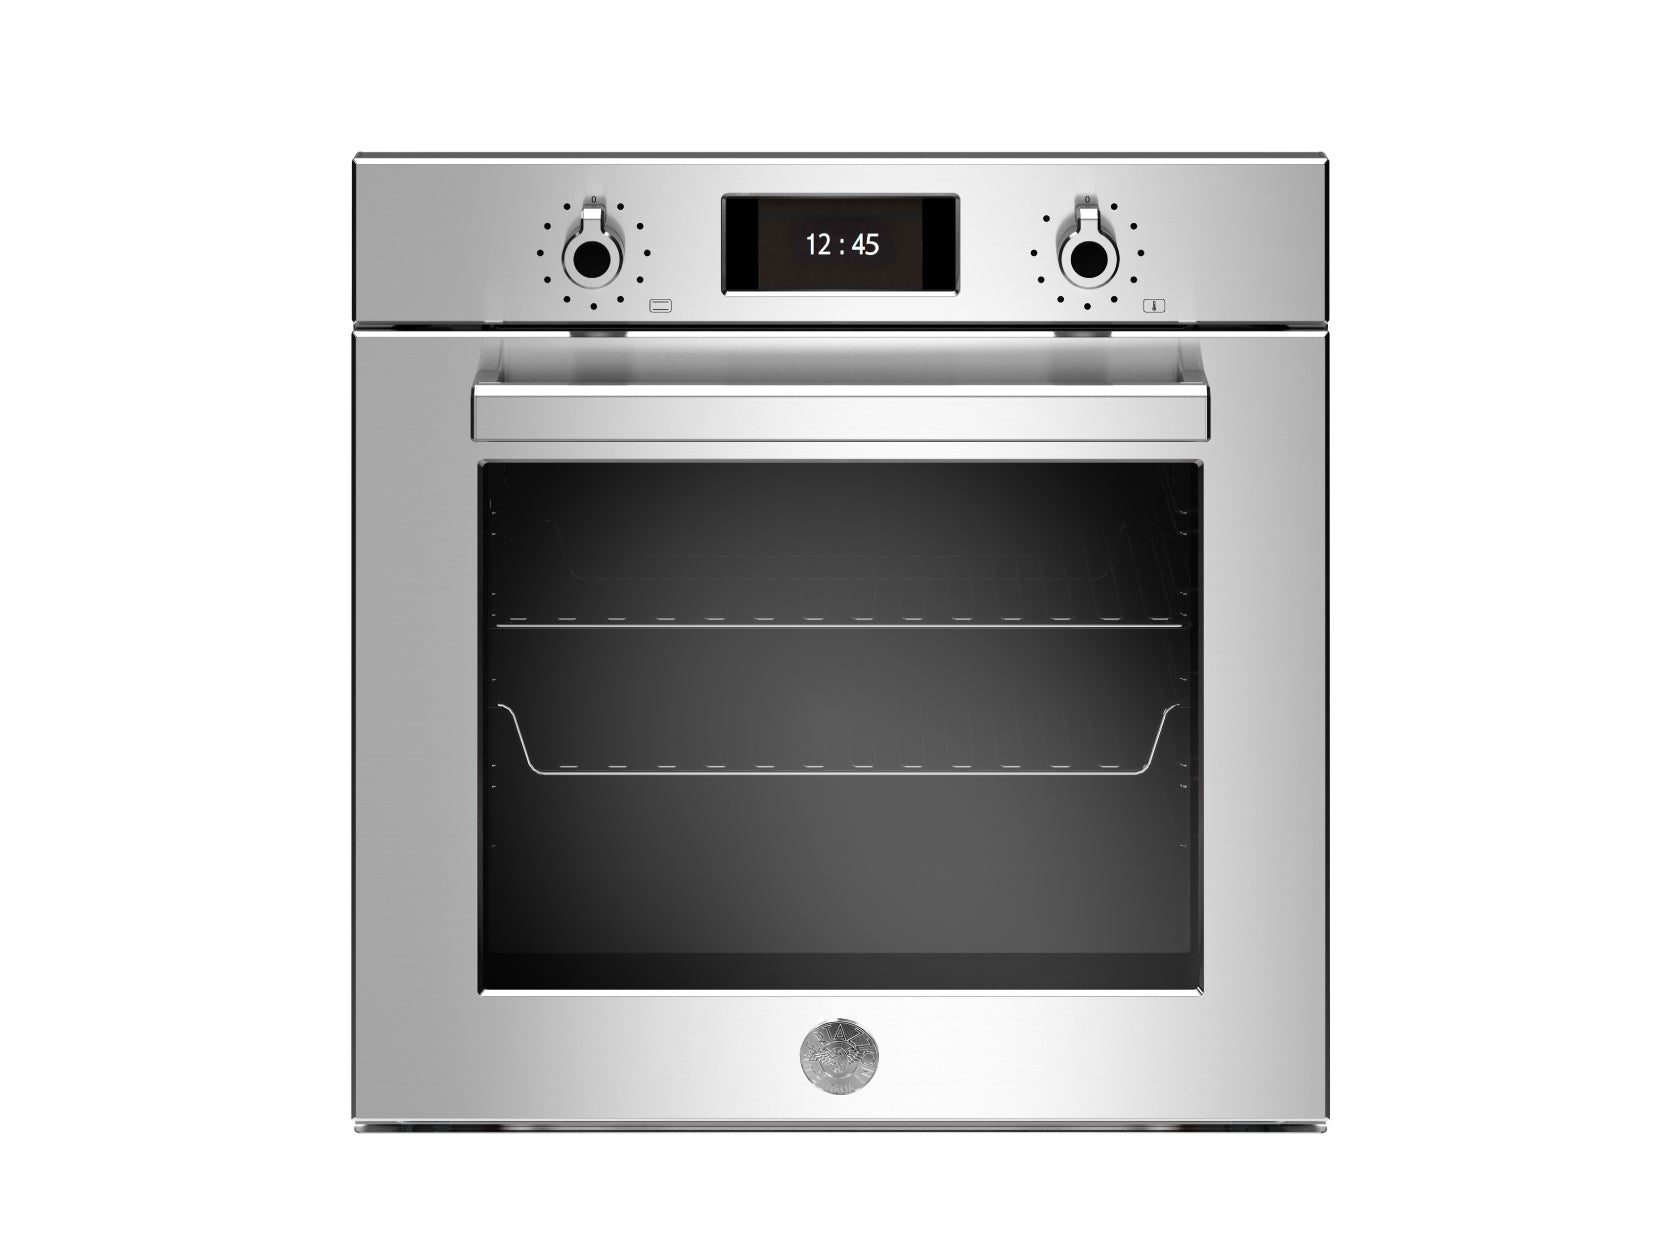 Bertazzoni F6011PROVPT Professional Series 60cm Electric Pyro Built-In Oven with TFT Display